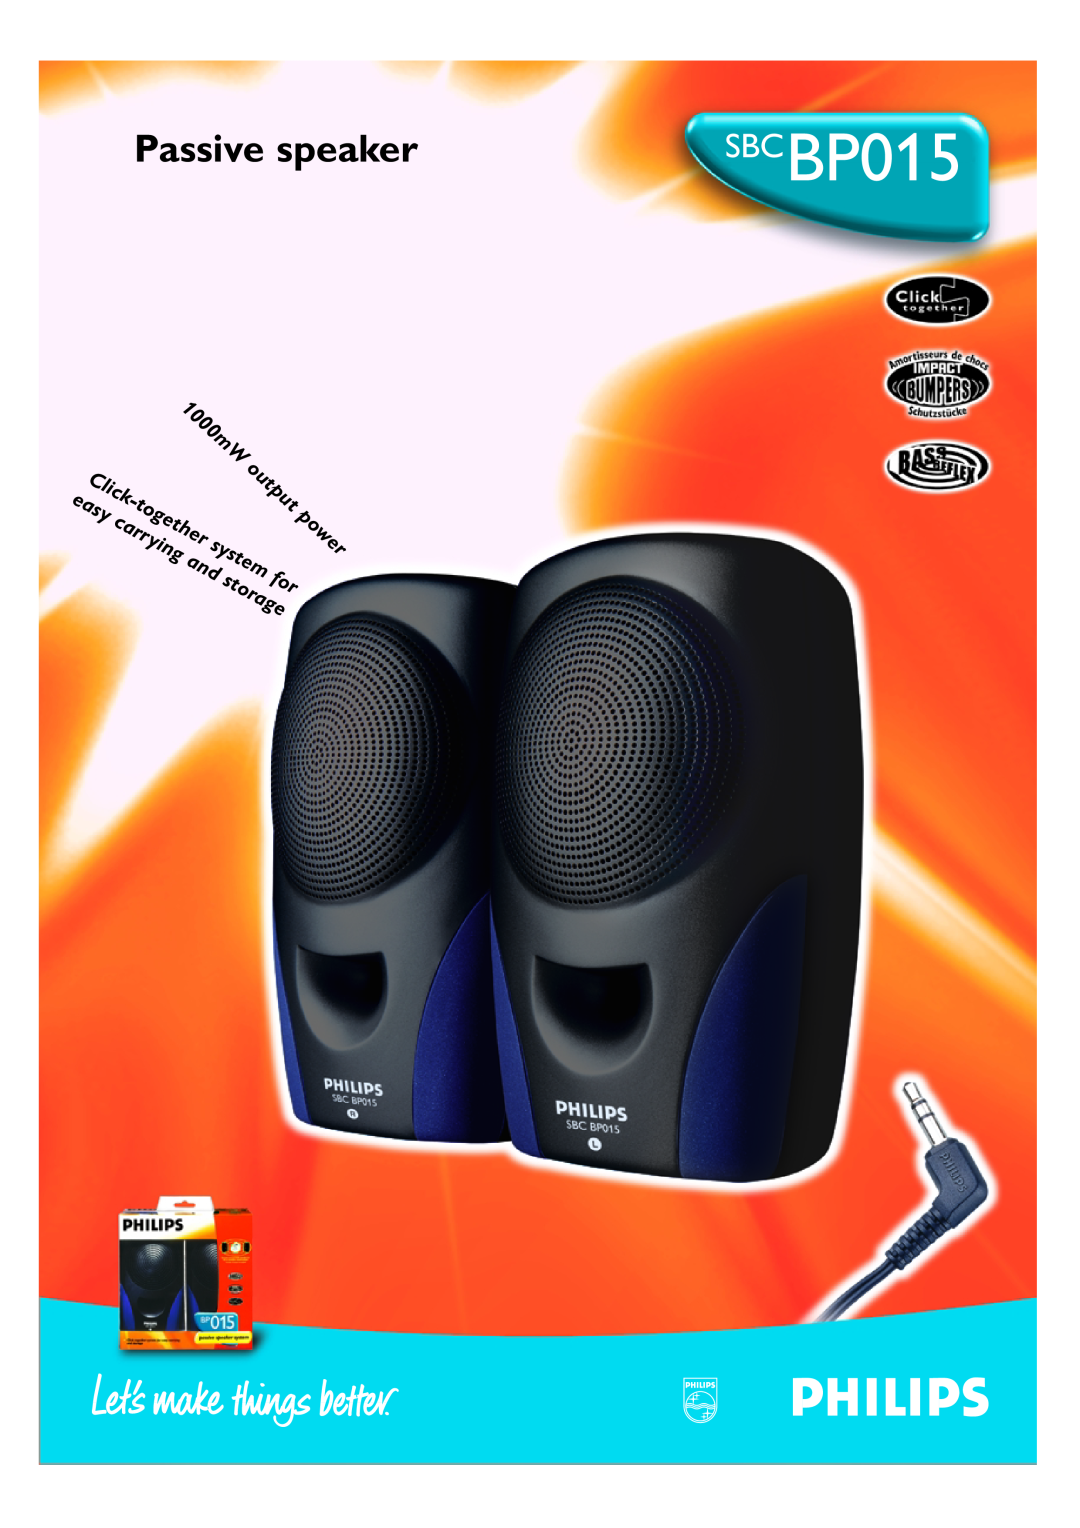 Philips SBC BP015 manual Passive speaker, power, 1000mW, output, Click, together, easy, system, carrying, storage 